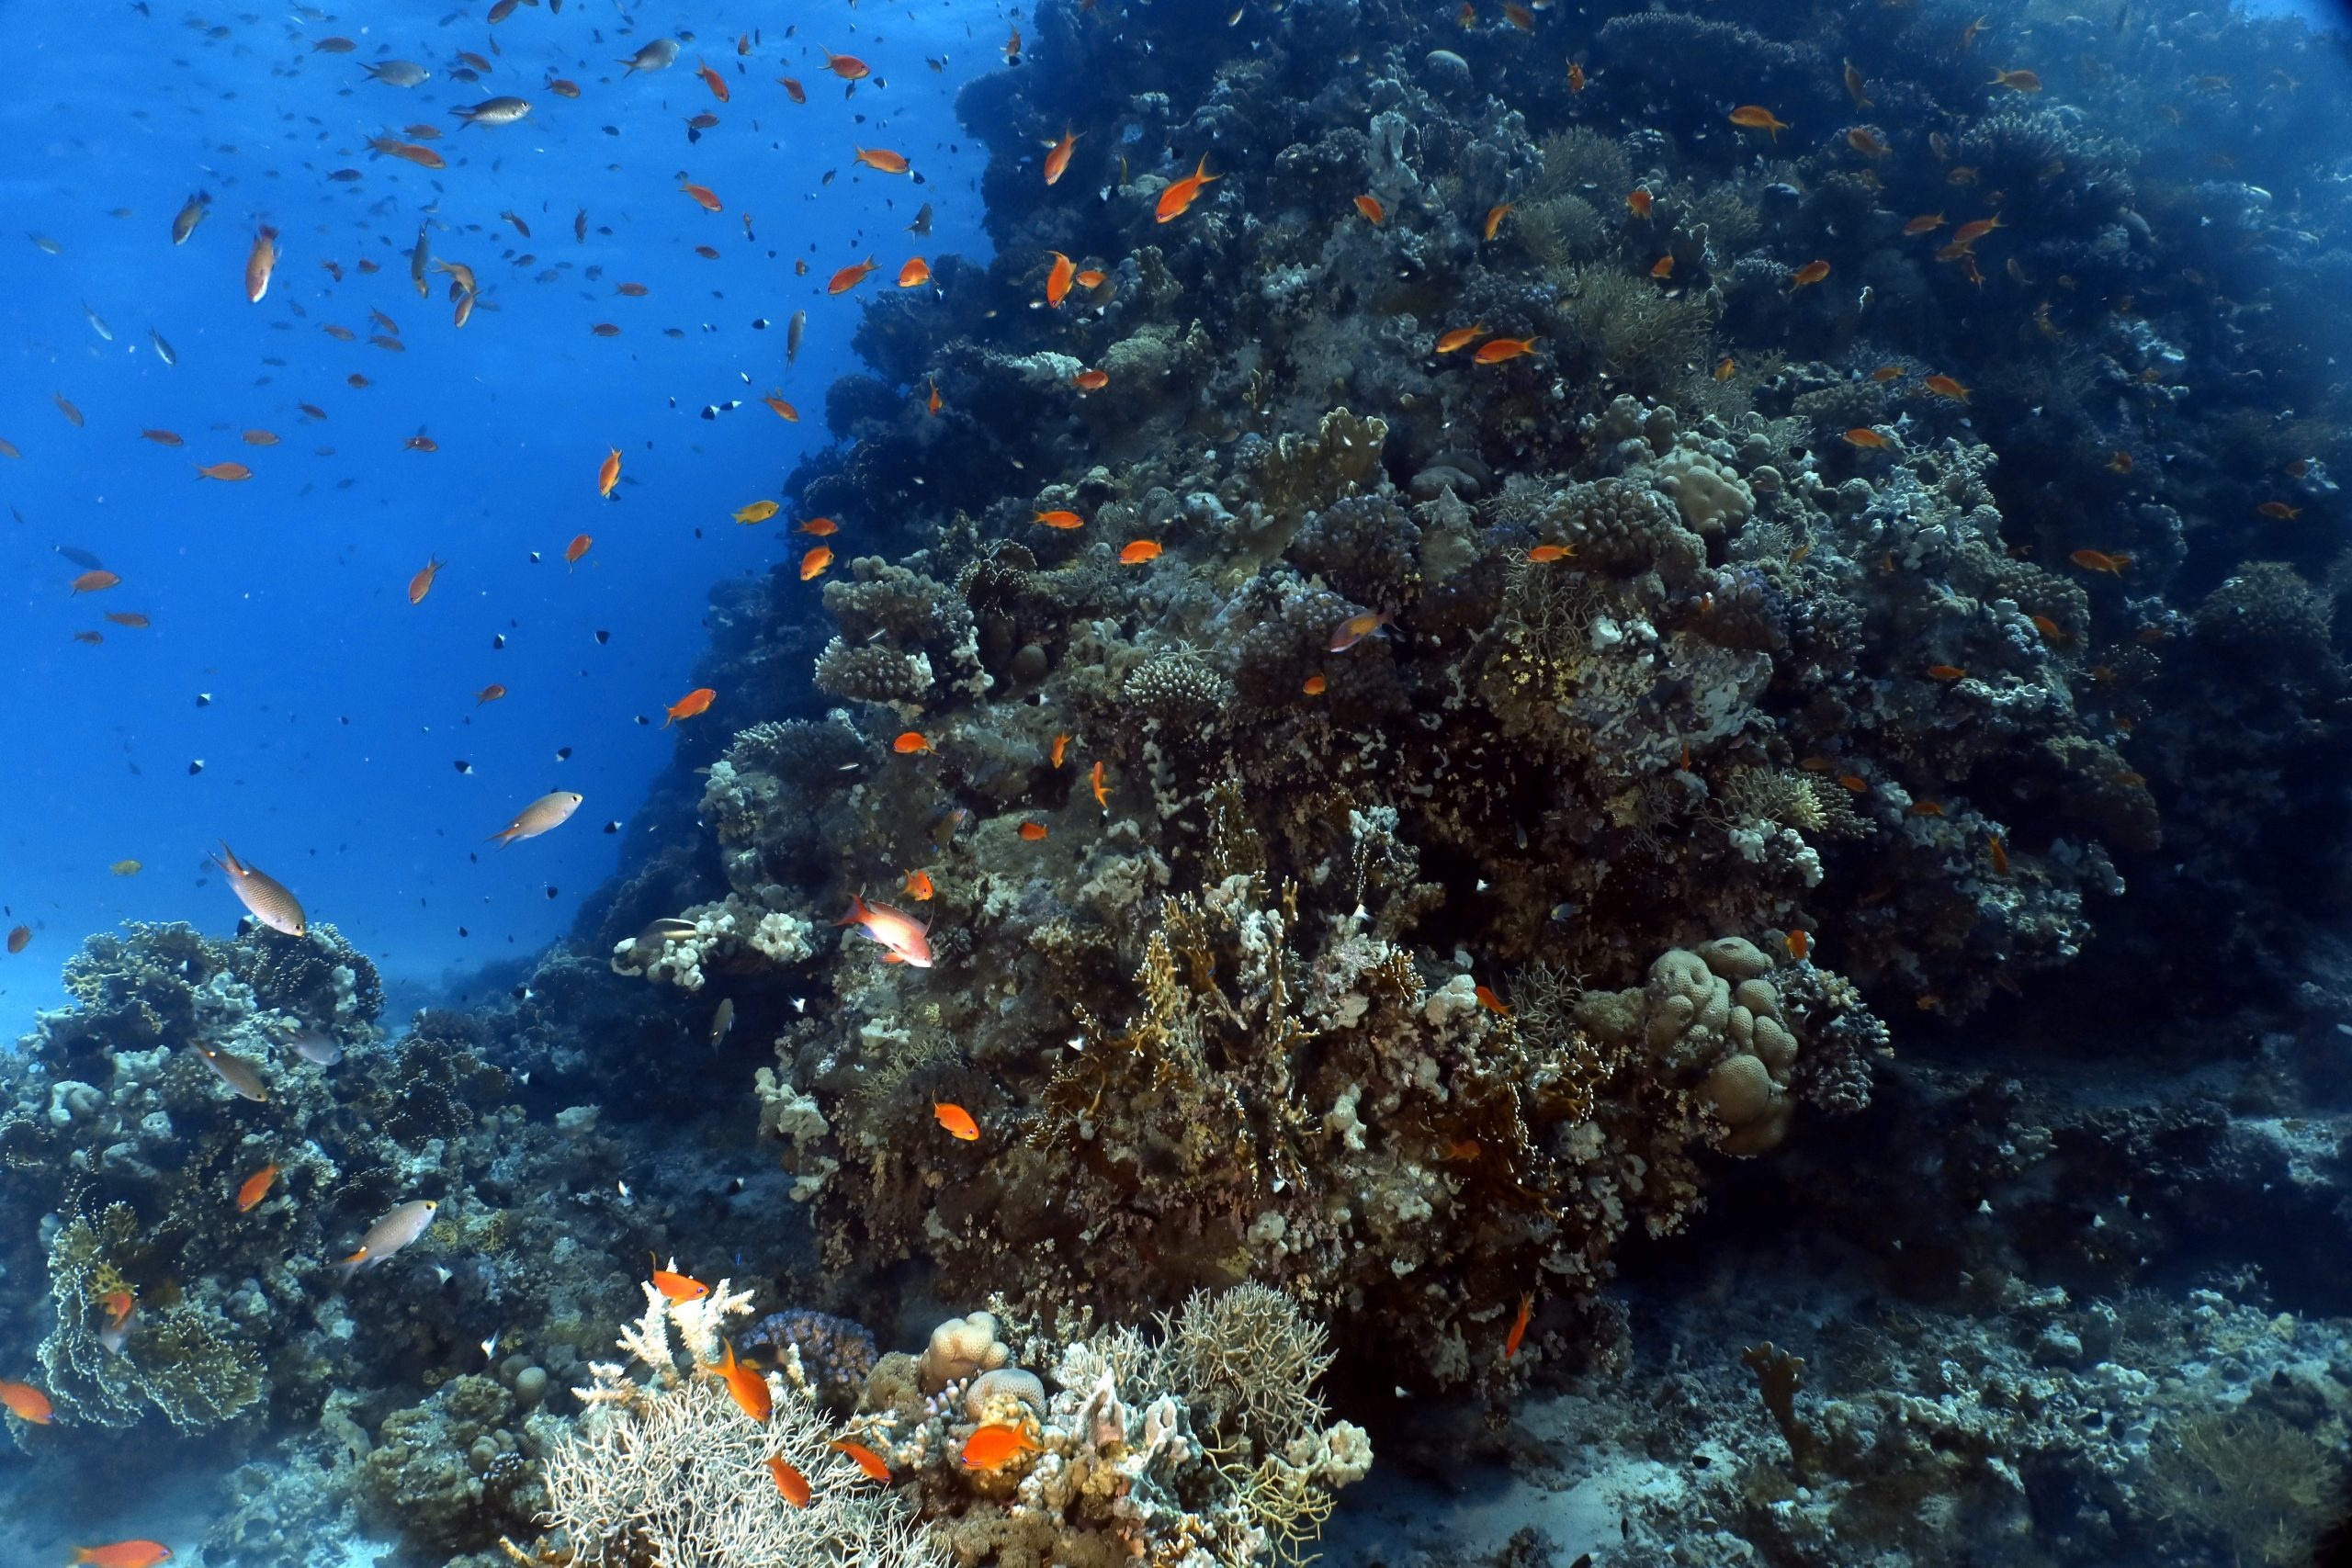  Egypt has launched three new diving sites off the coast of the Red Sea